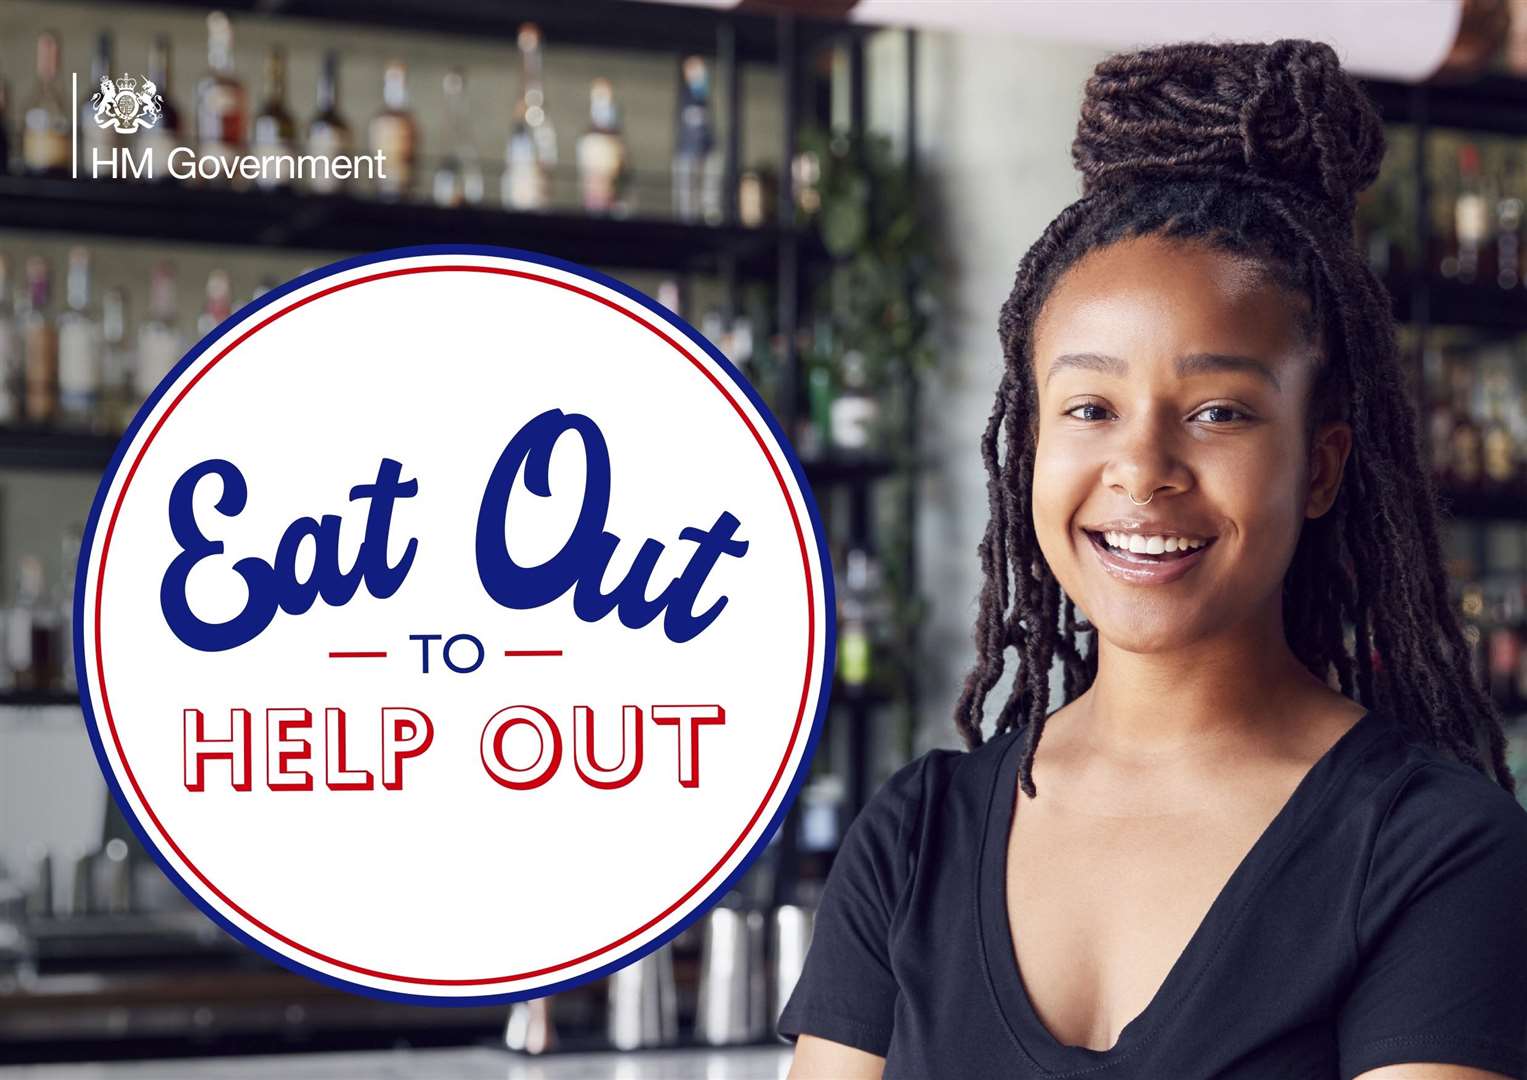 The Eat Out To Help Out scheme kicks off on Monday.